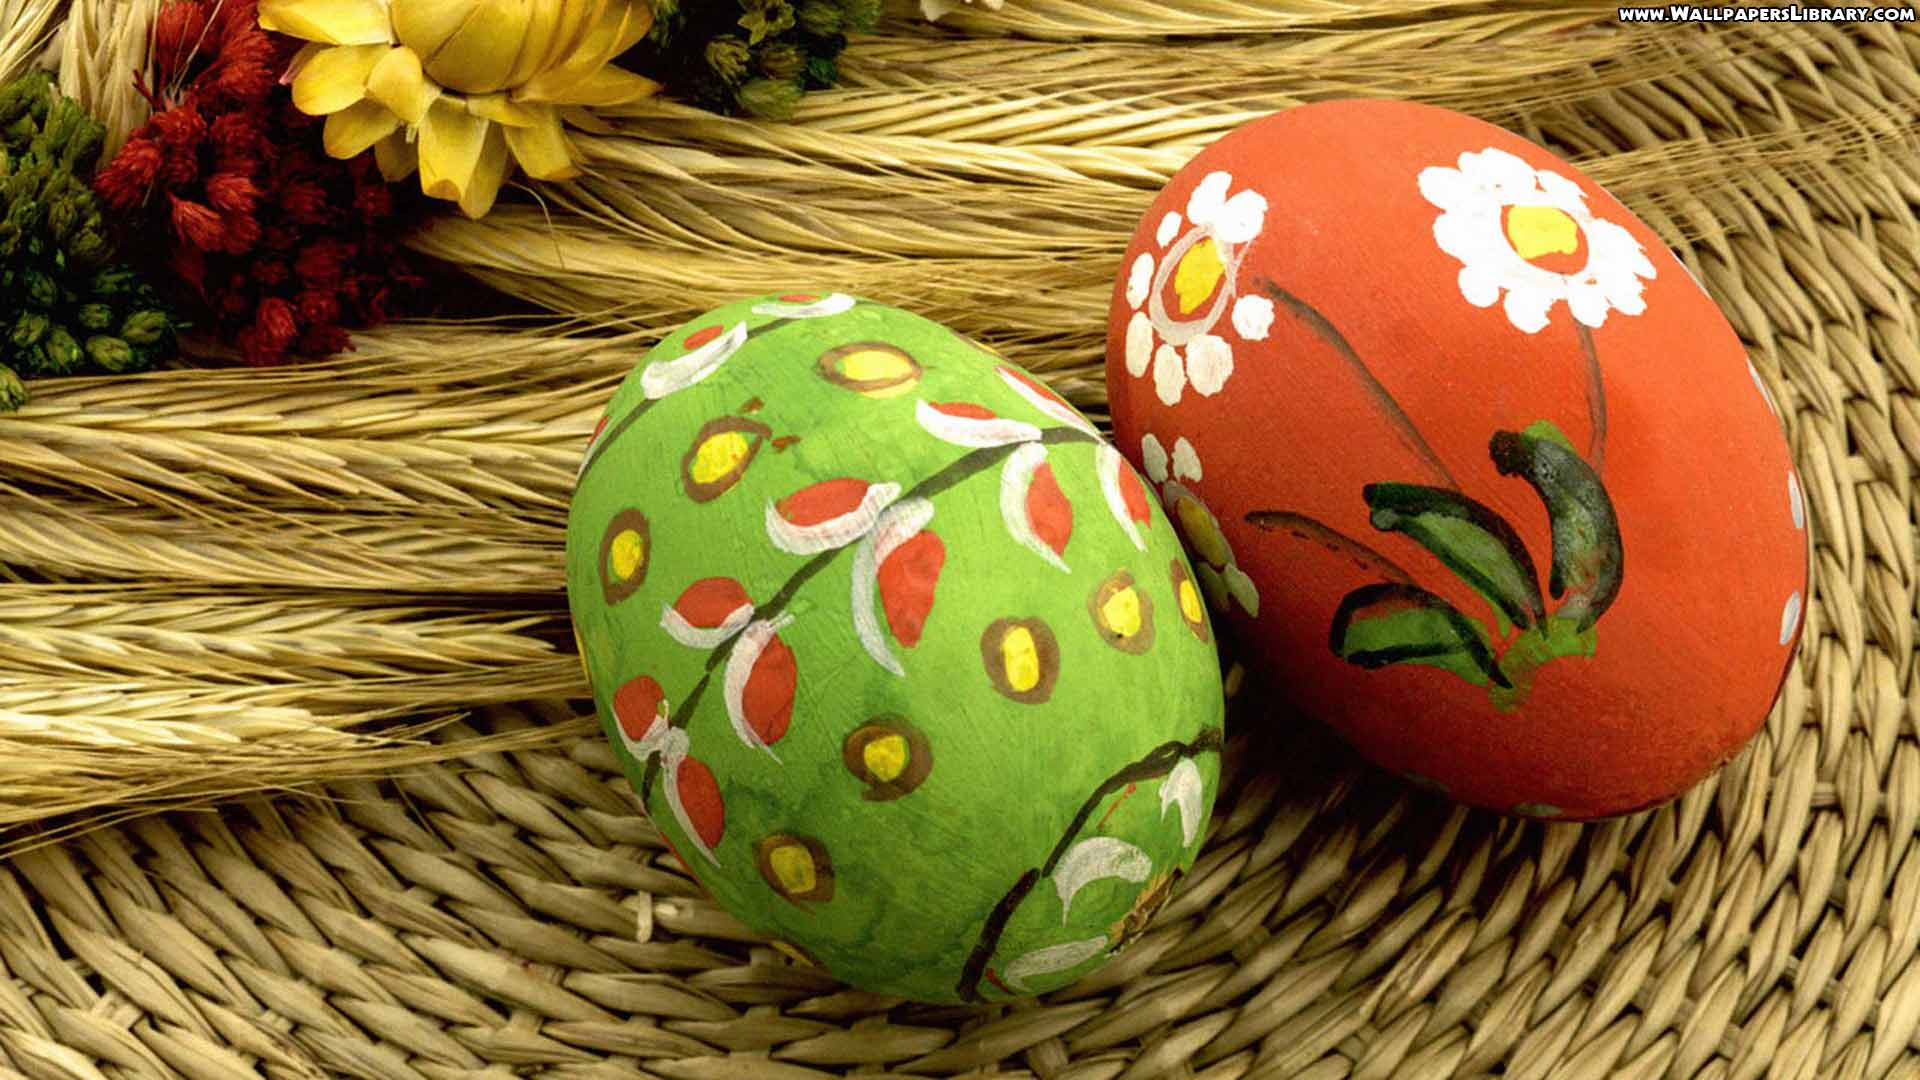 Easter Eggs Holiday Wallpaper. Download HD Wallpaper